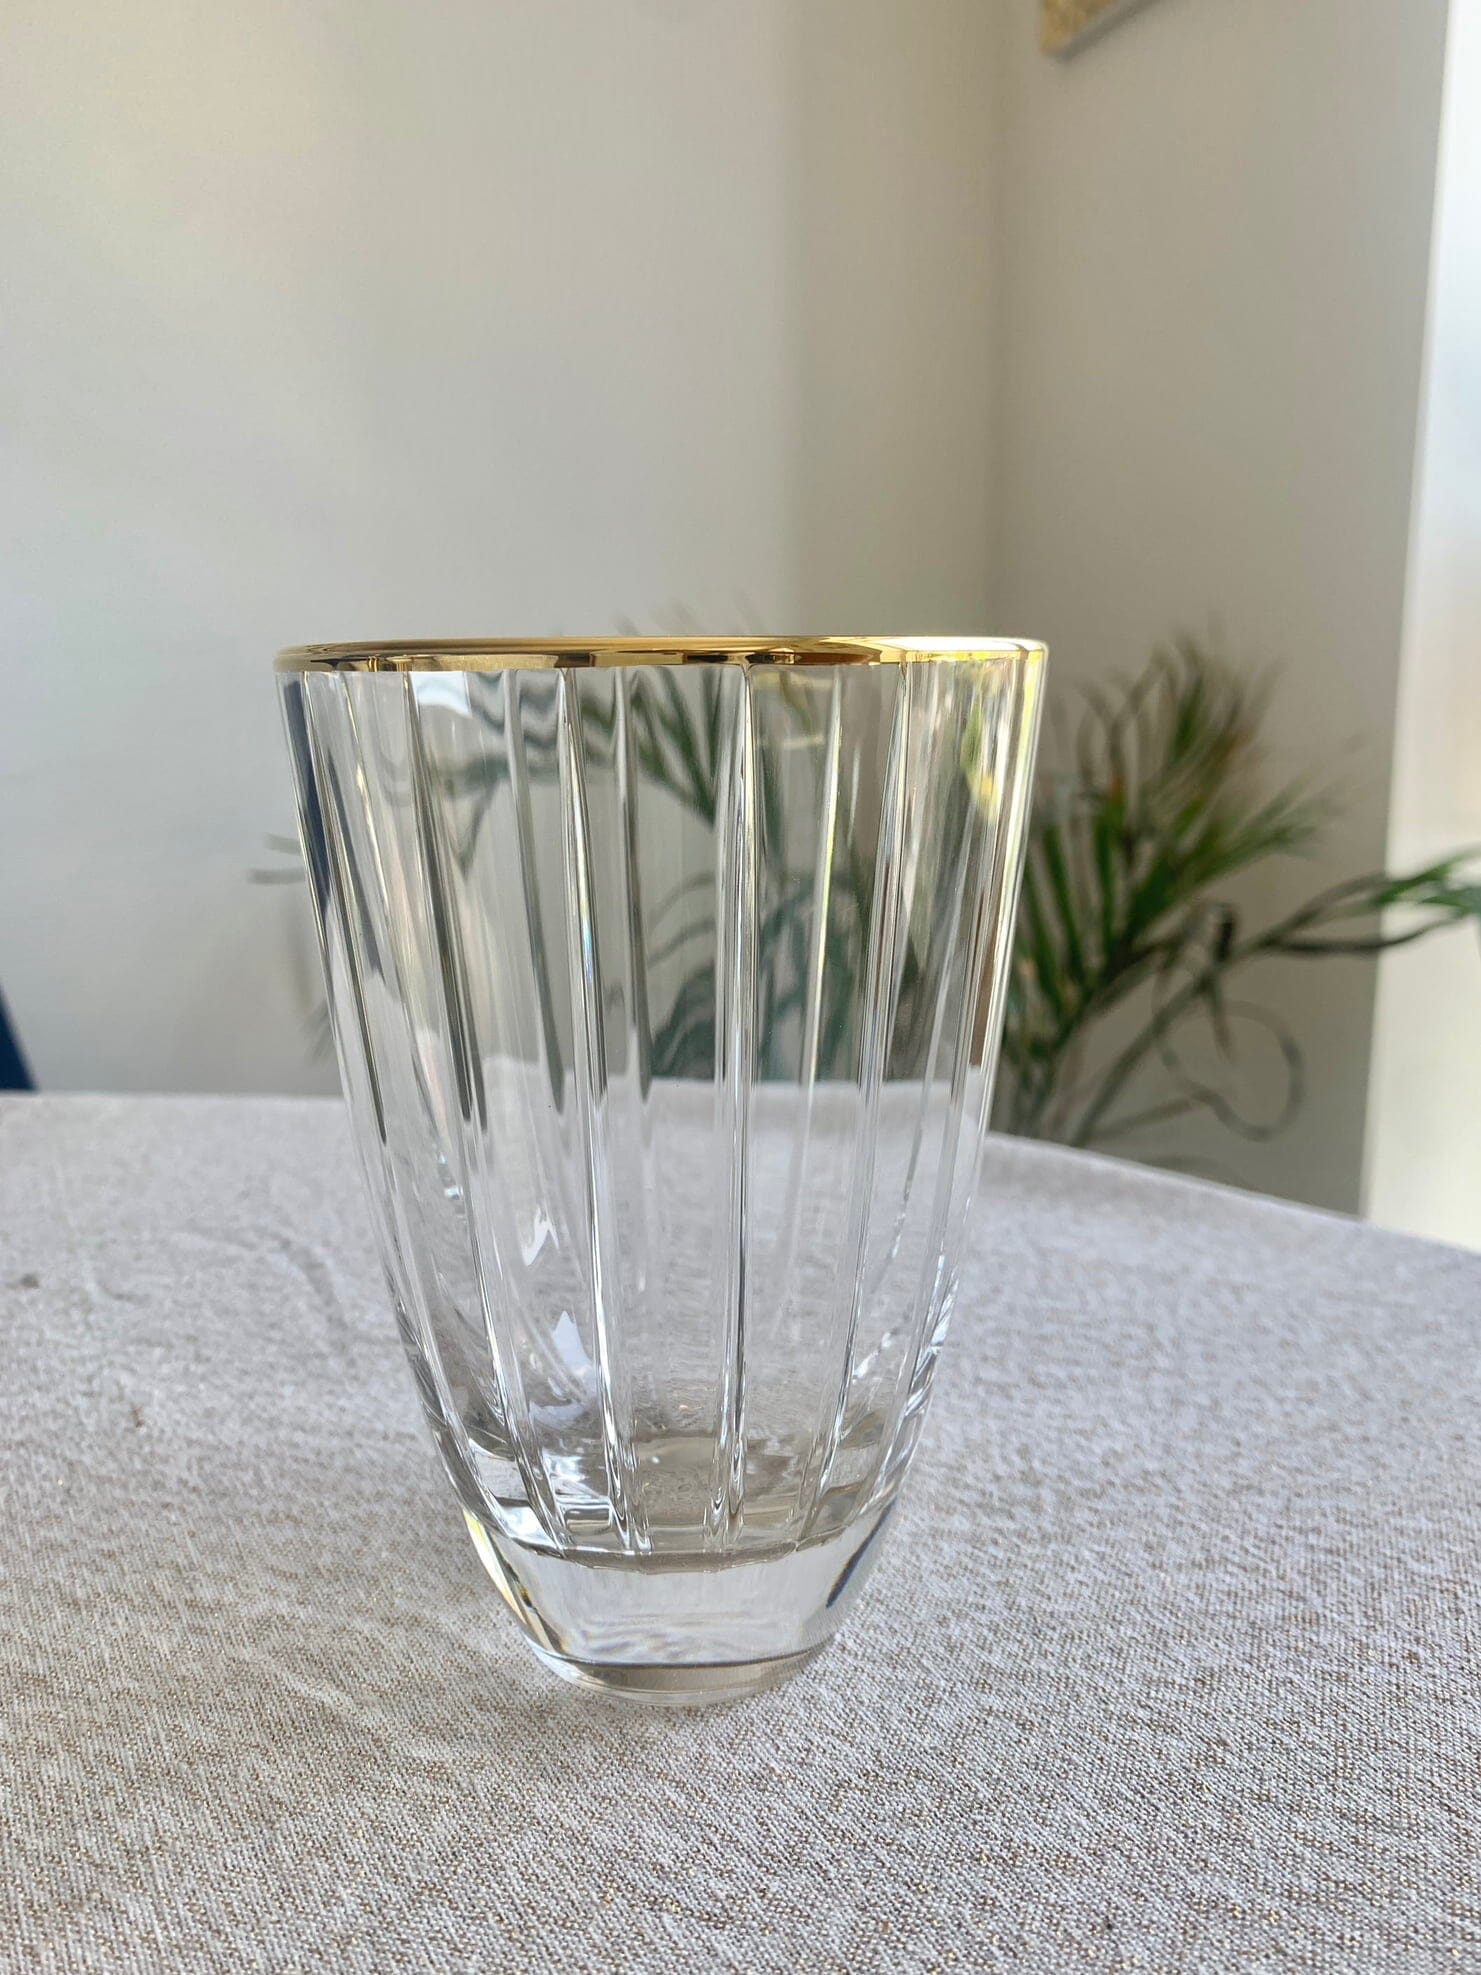 Set of 6 Tumblers with Gold Trim Tumblers High Class Touch - Home Decor 